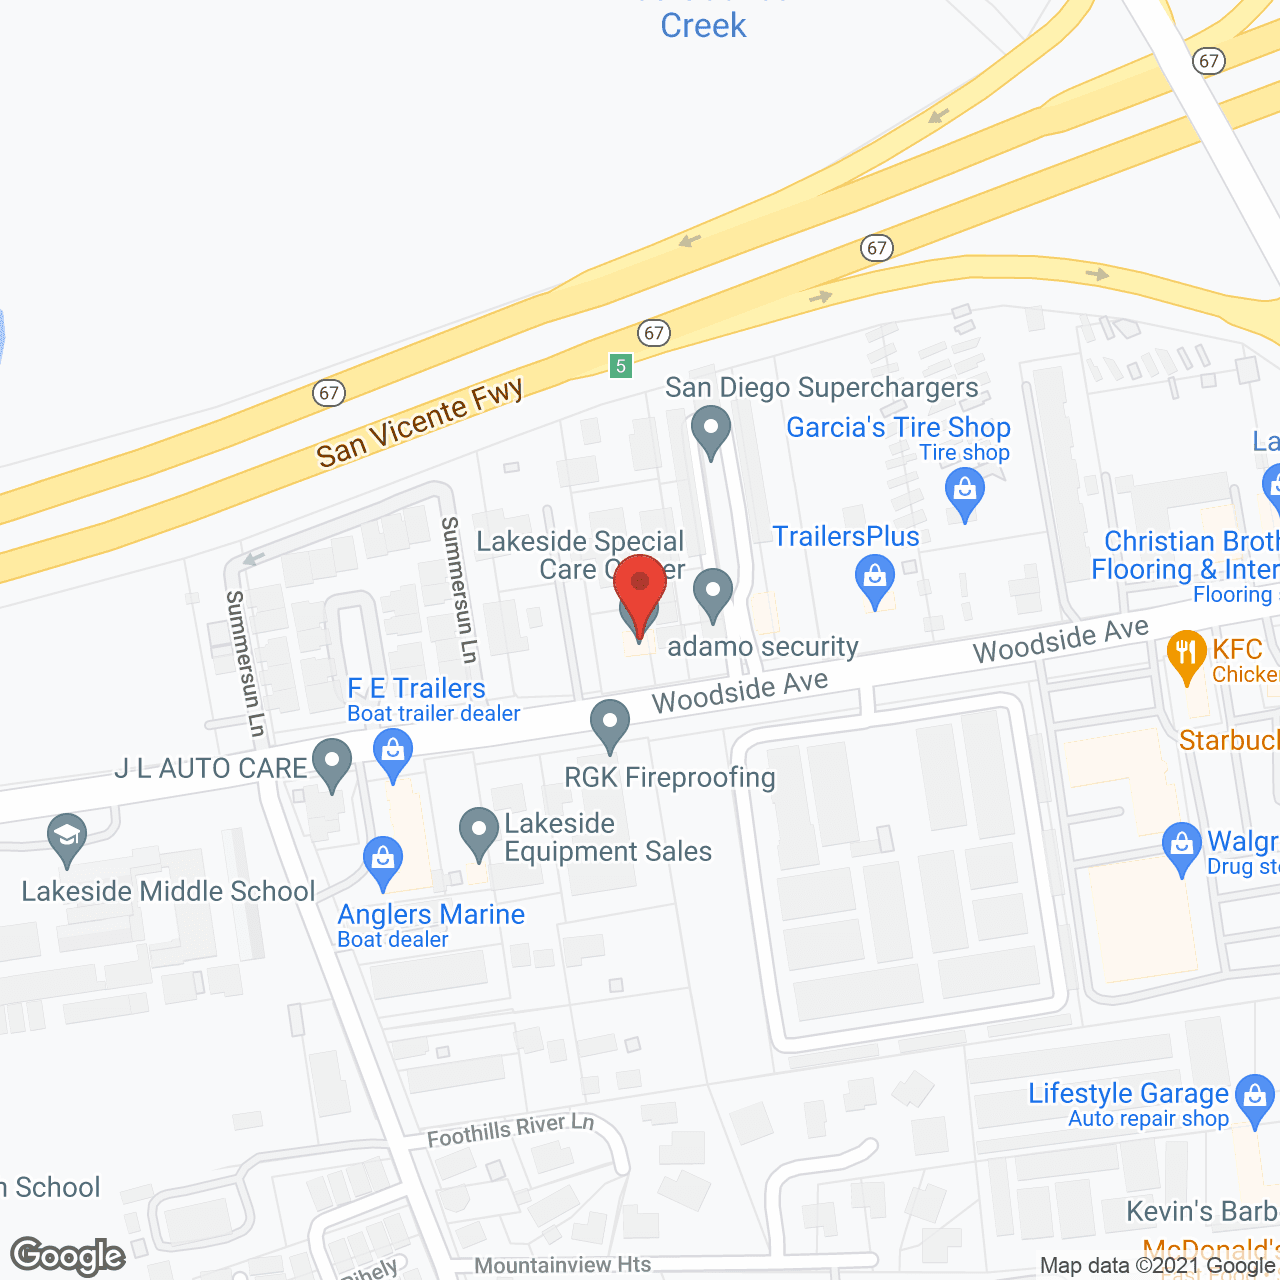 Lakeside Special Care Center in google map